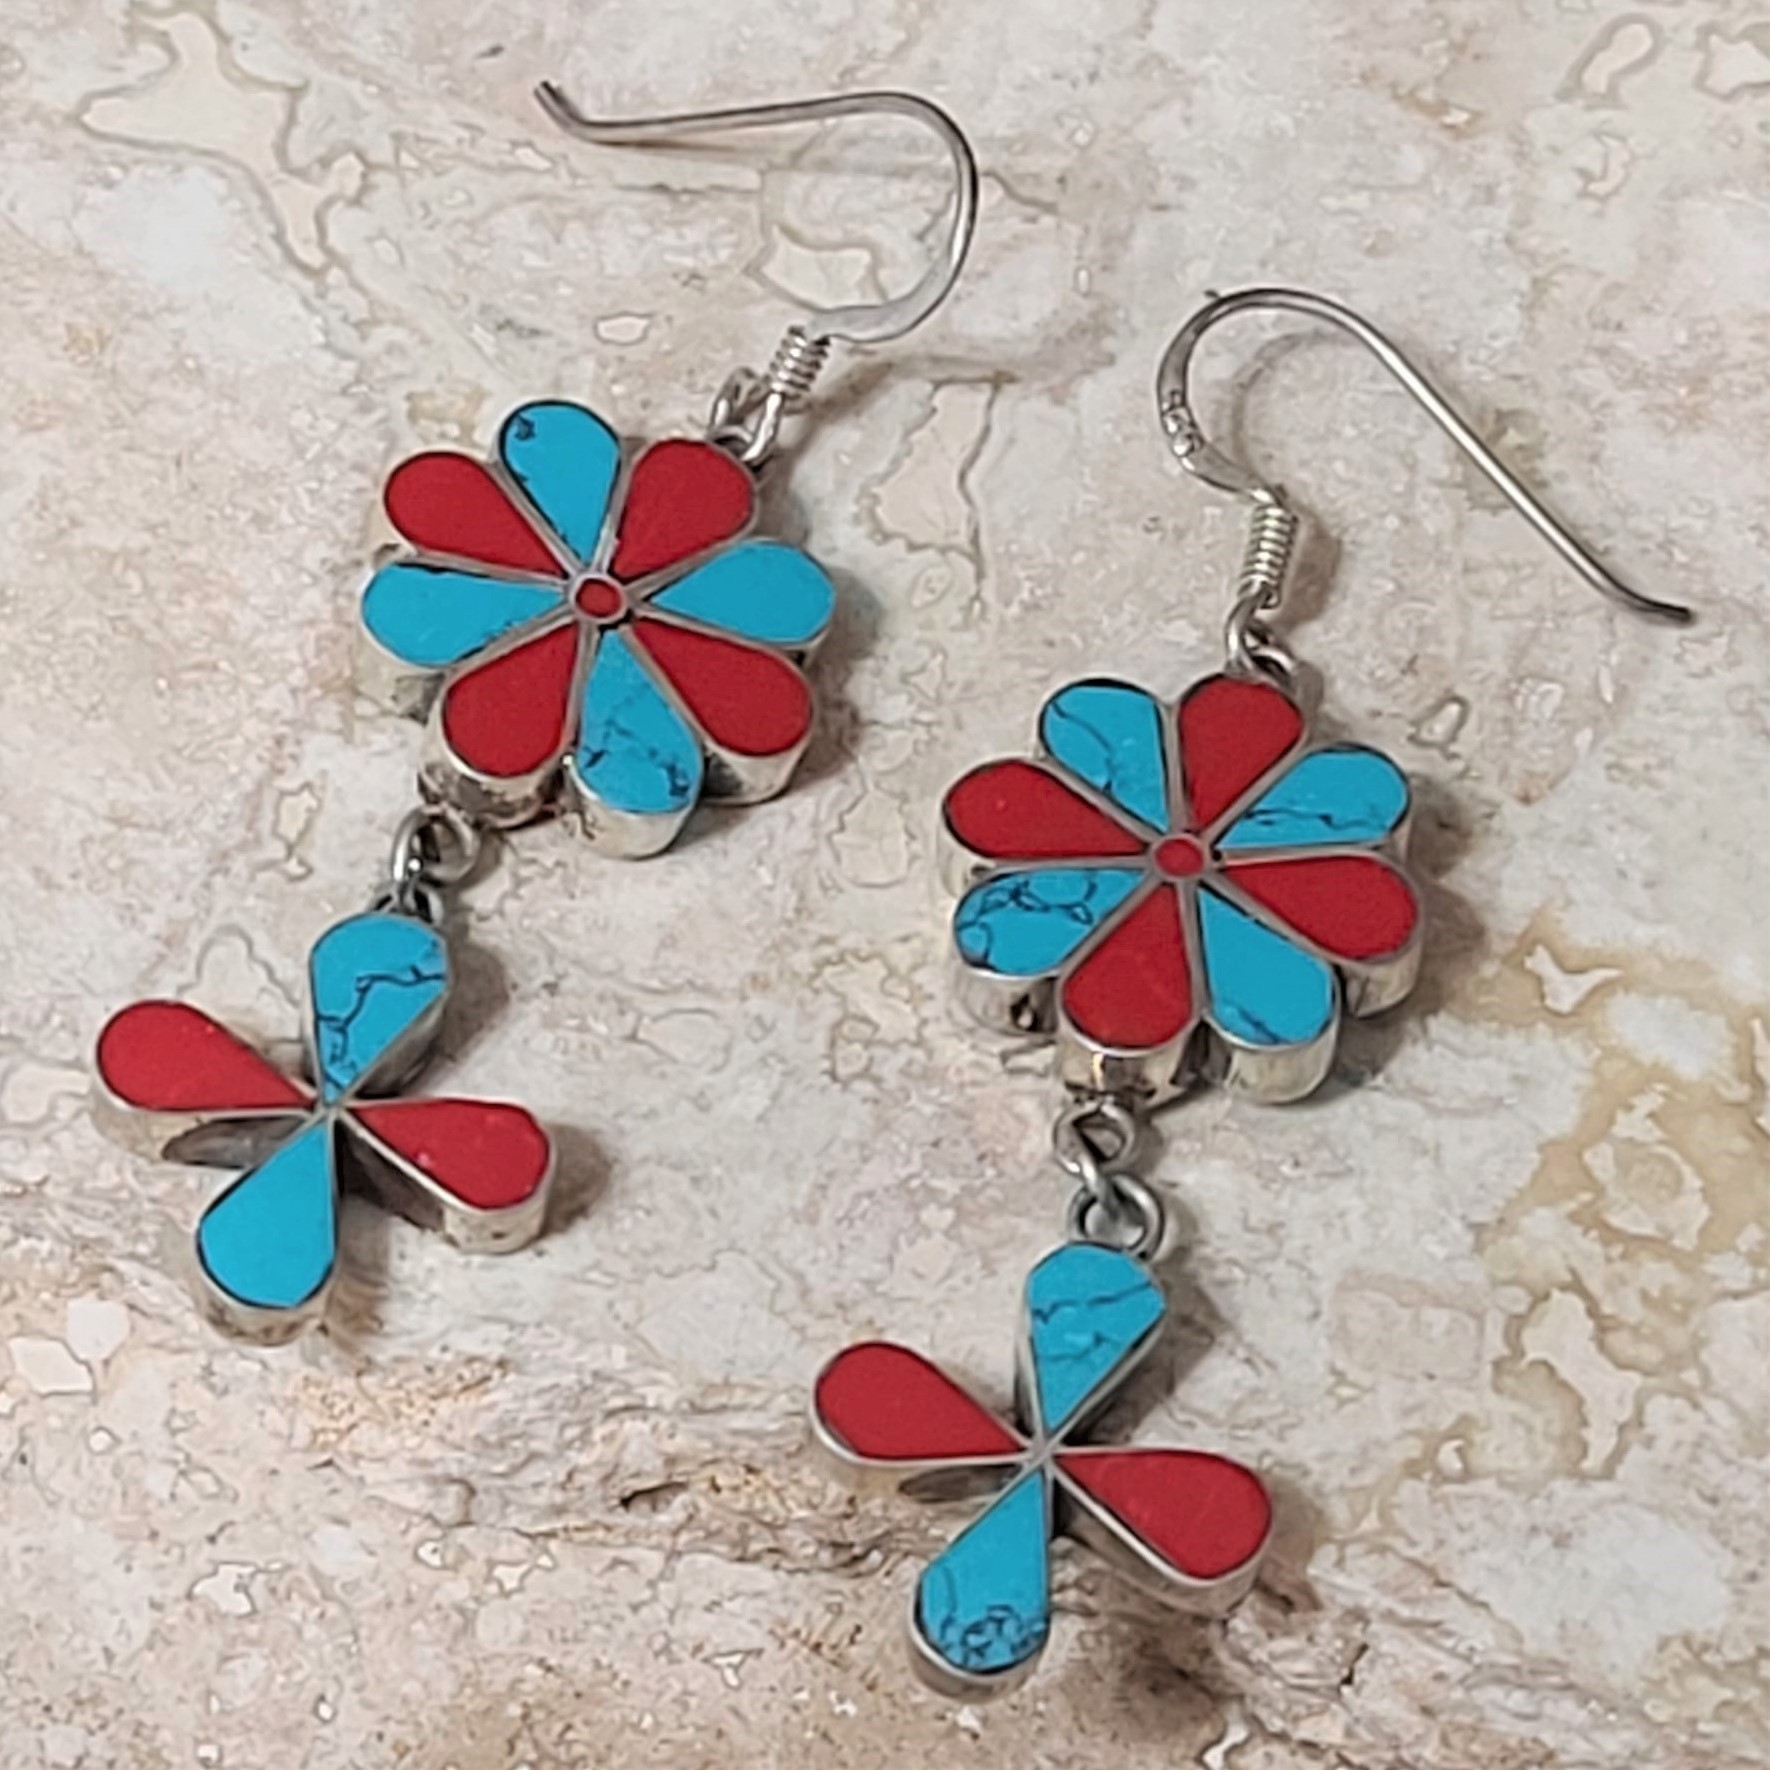 Coral & Turquoise 925 Sterling Silver Vintage Earrings